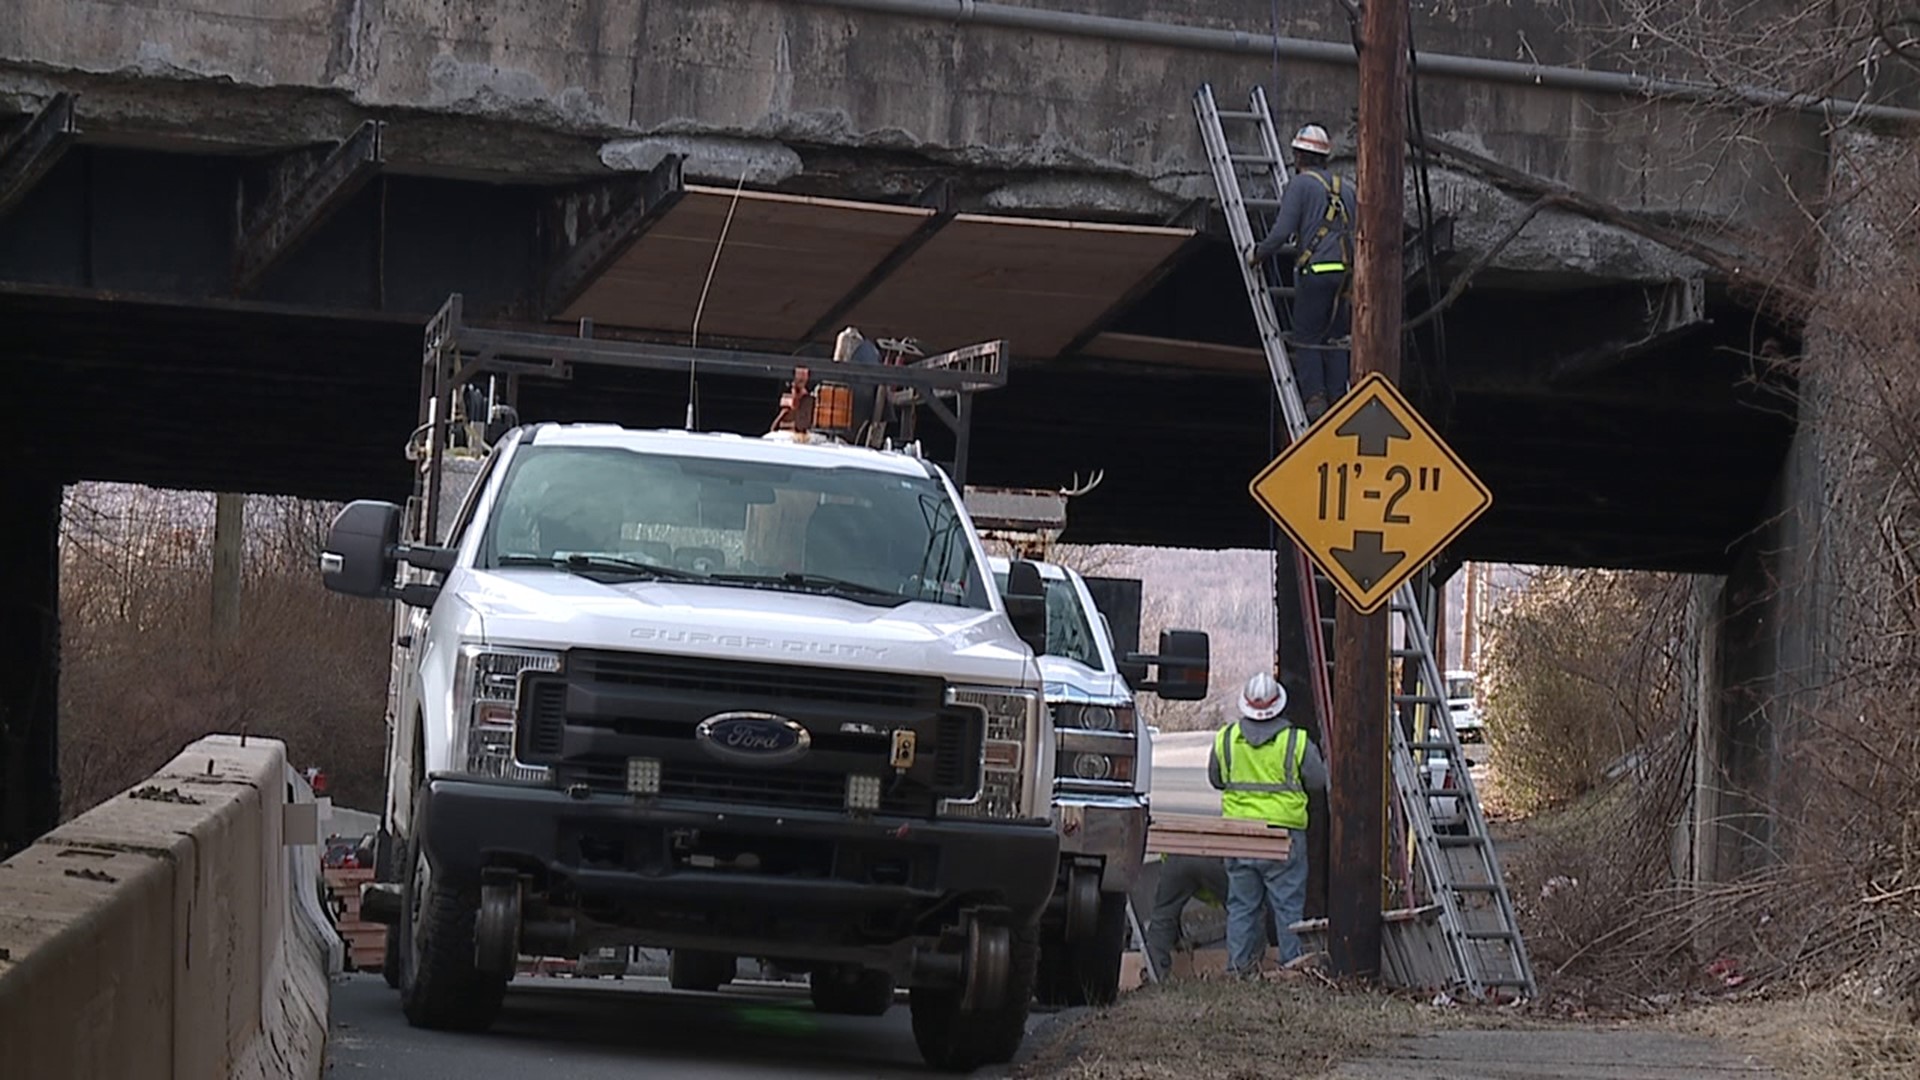 Crews from Norfolk Southern Railroad were out placing wooden planks underneath the railroad bridge that residents say has been crumbling for years.